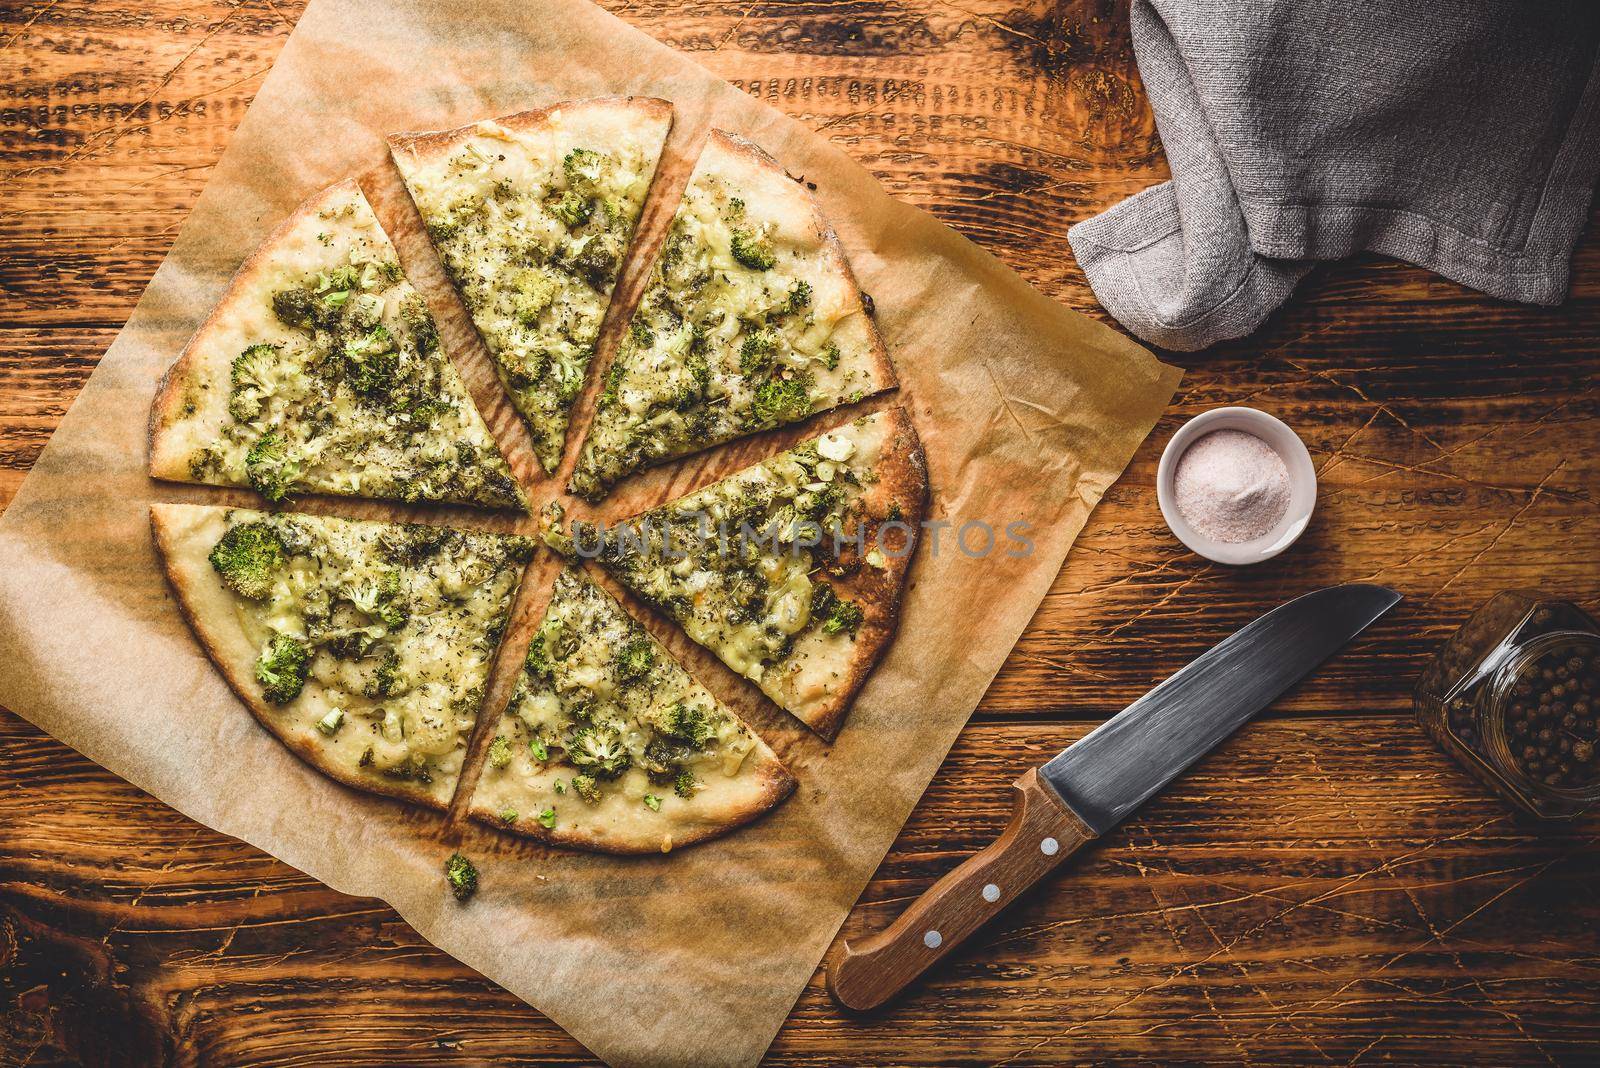 Sliced pizza with broccoli, herbs and parmesan by Seva_blsv